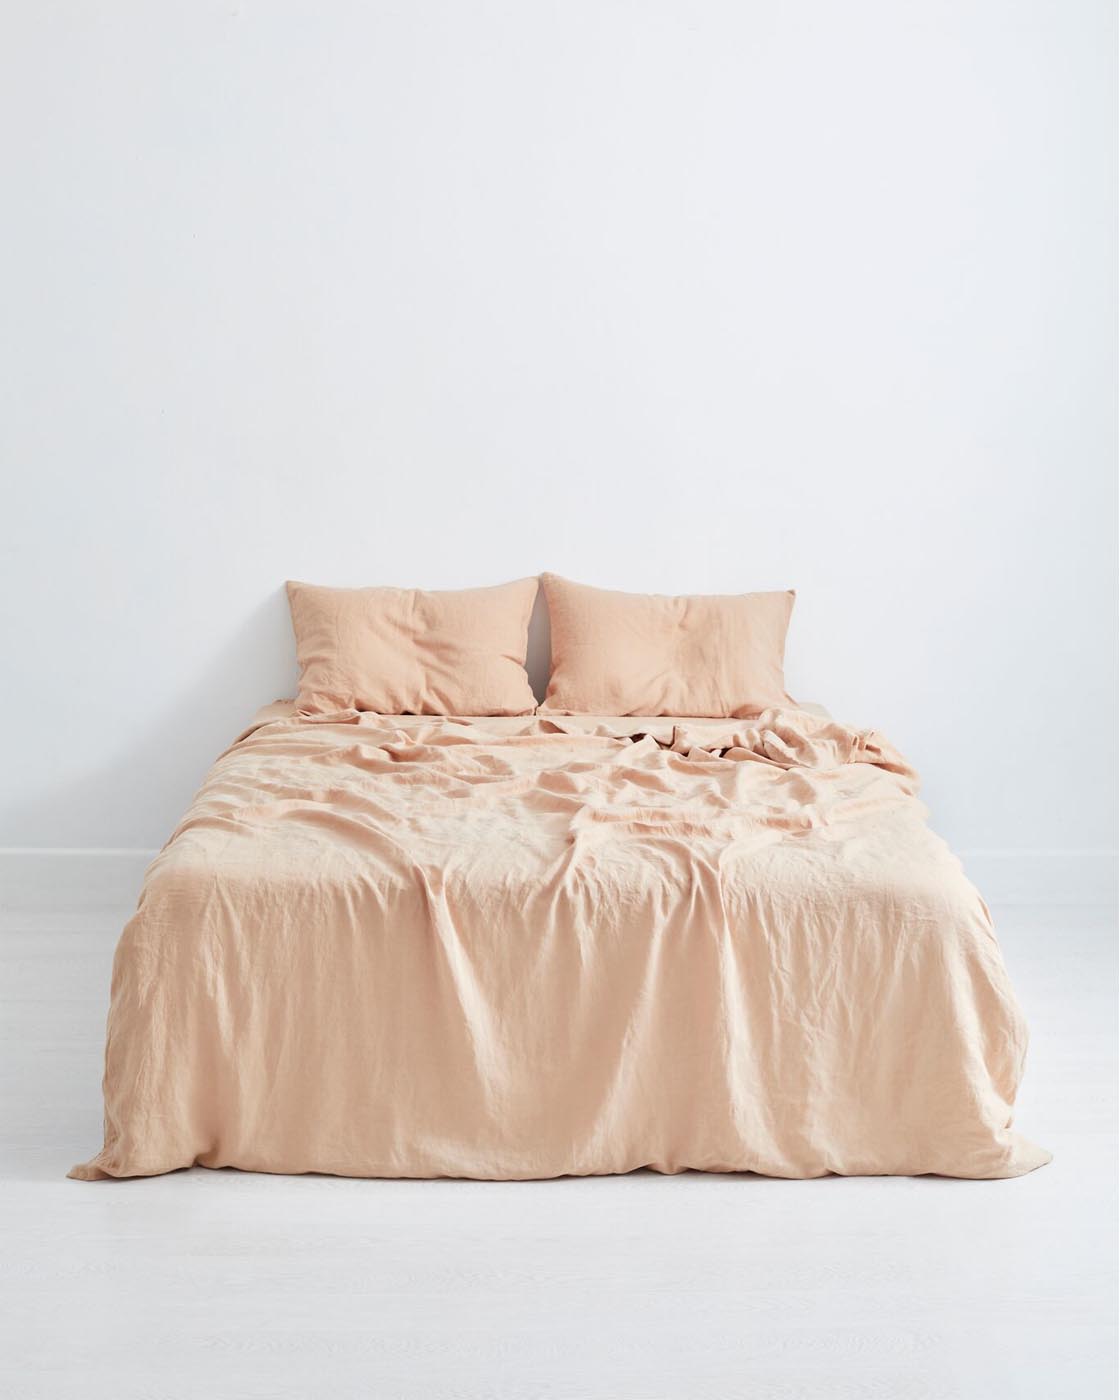 Bed Threads- Terracotta 100% Flax Linen Bedding Set in KING